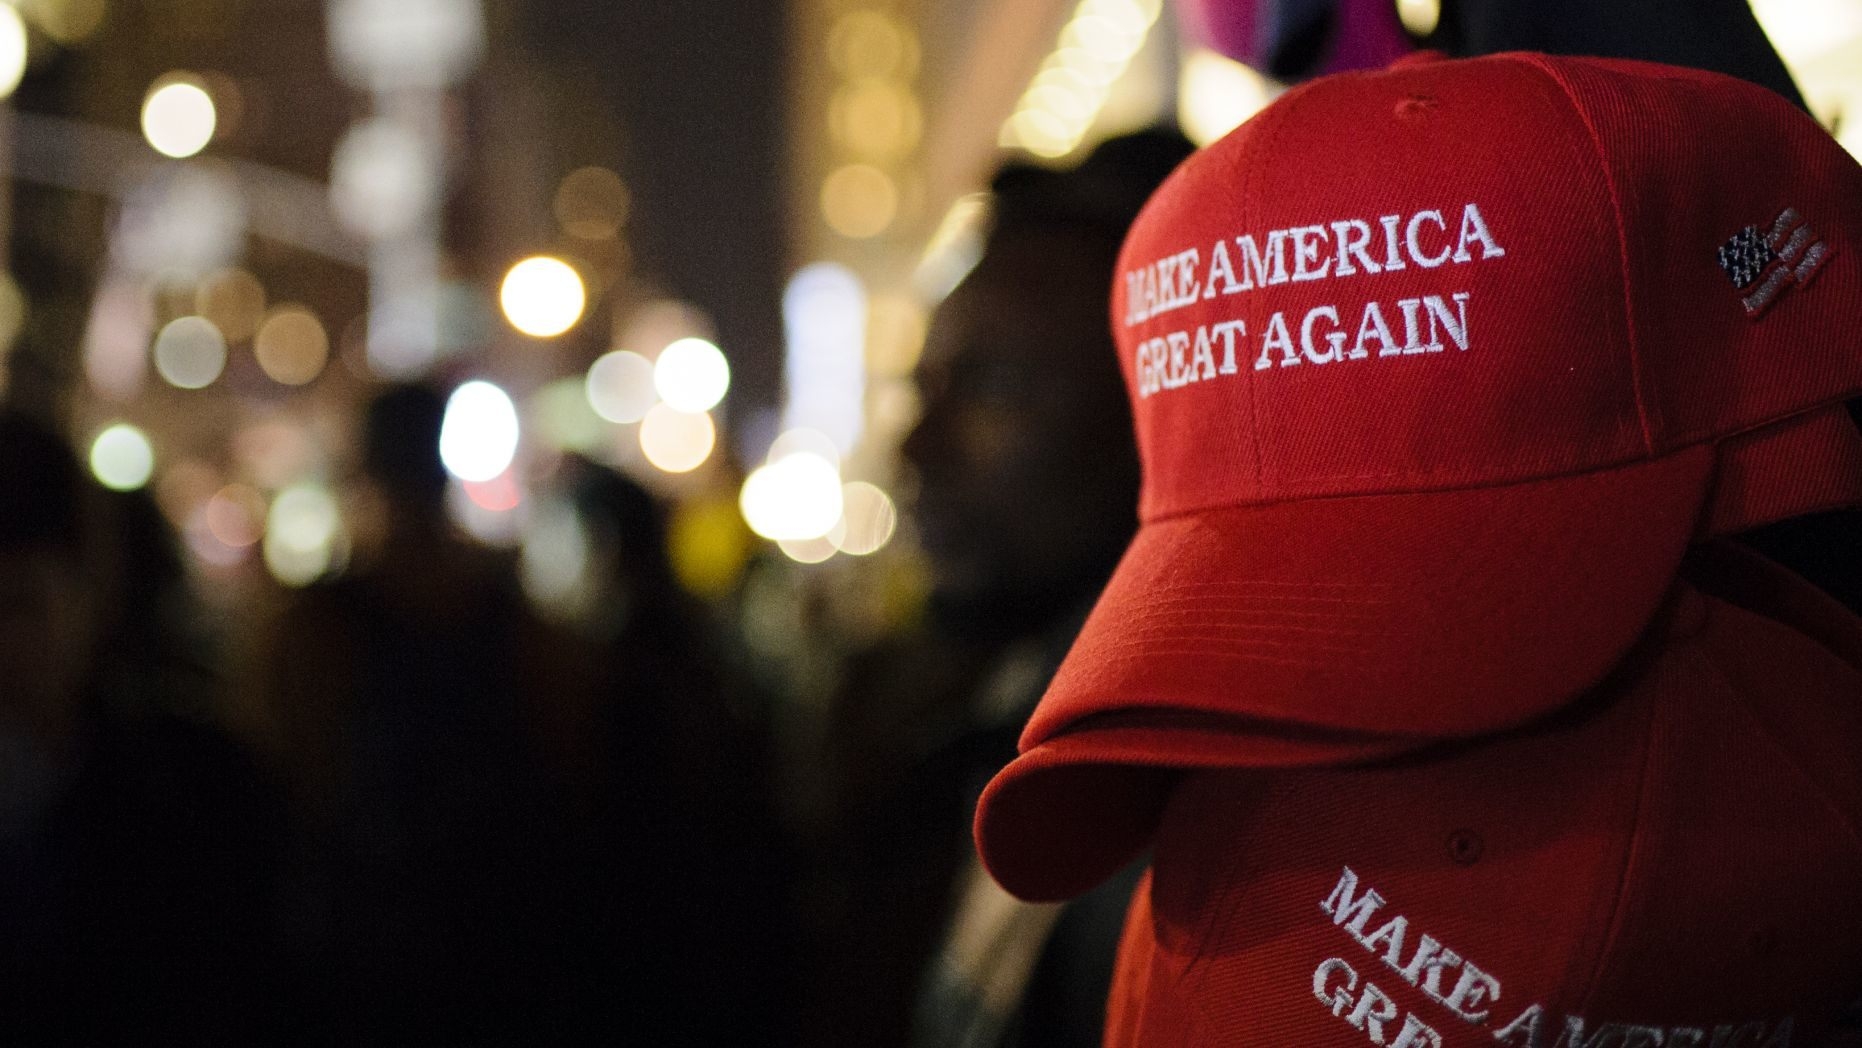 Restaurant owner who banned customers in MAGA hats takes back remarks, apologizes for ‘amplifying the anger’